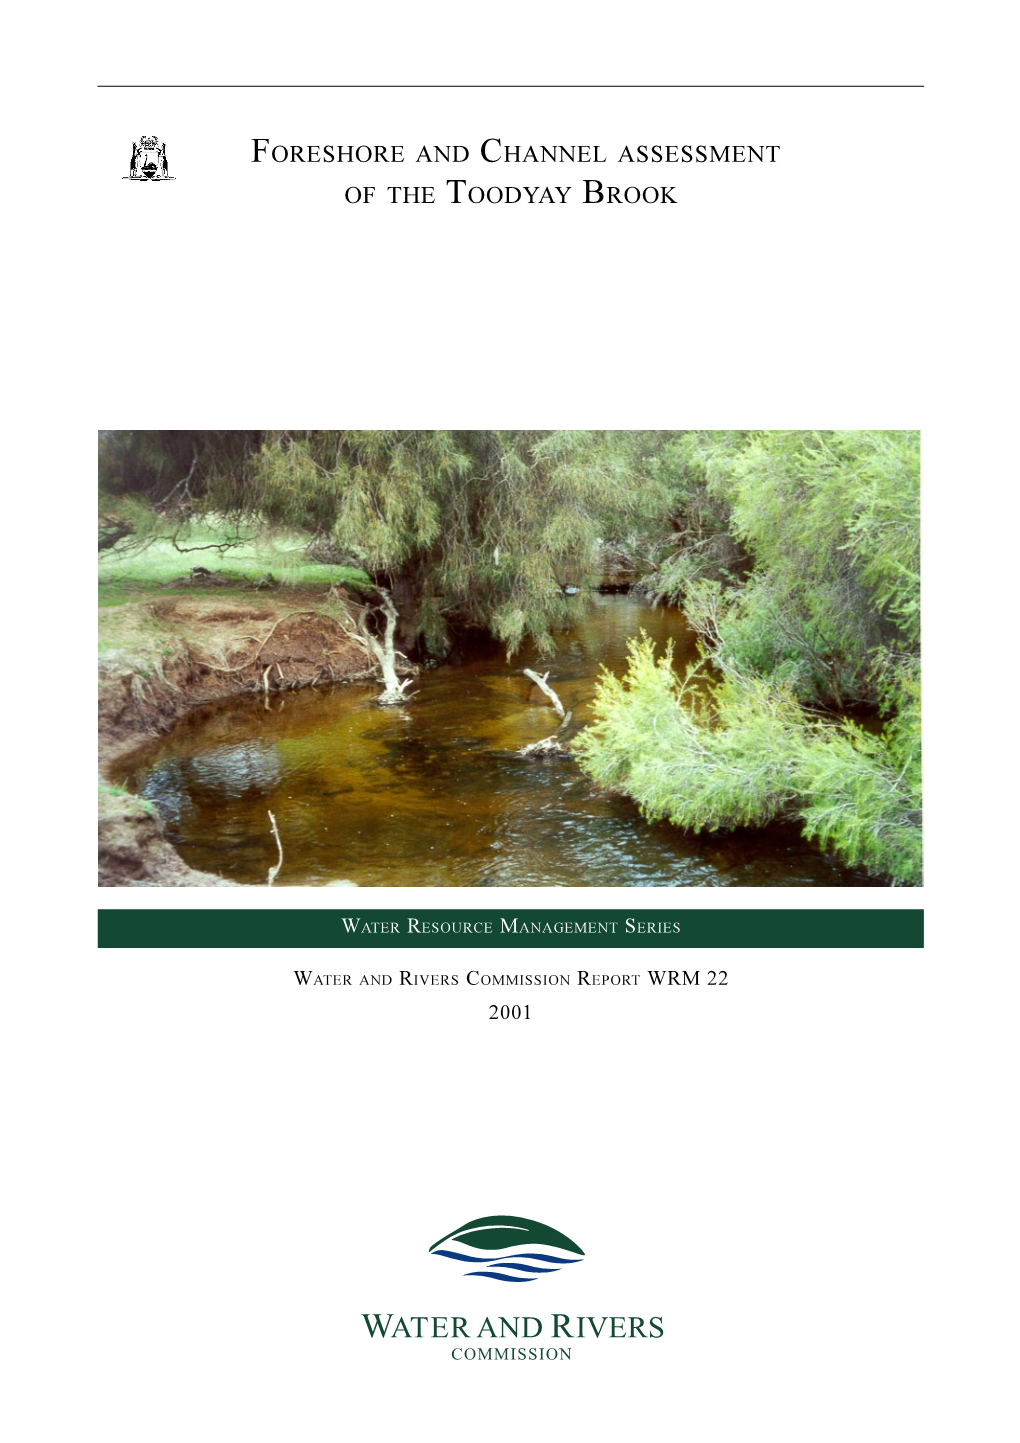 Foreshore and Channel Assessment of the Toodyay Brook